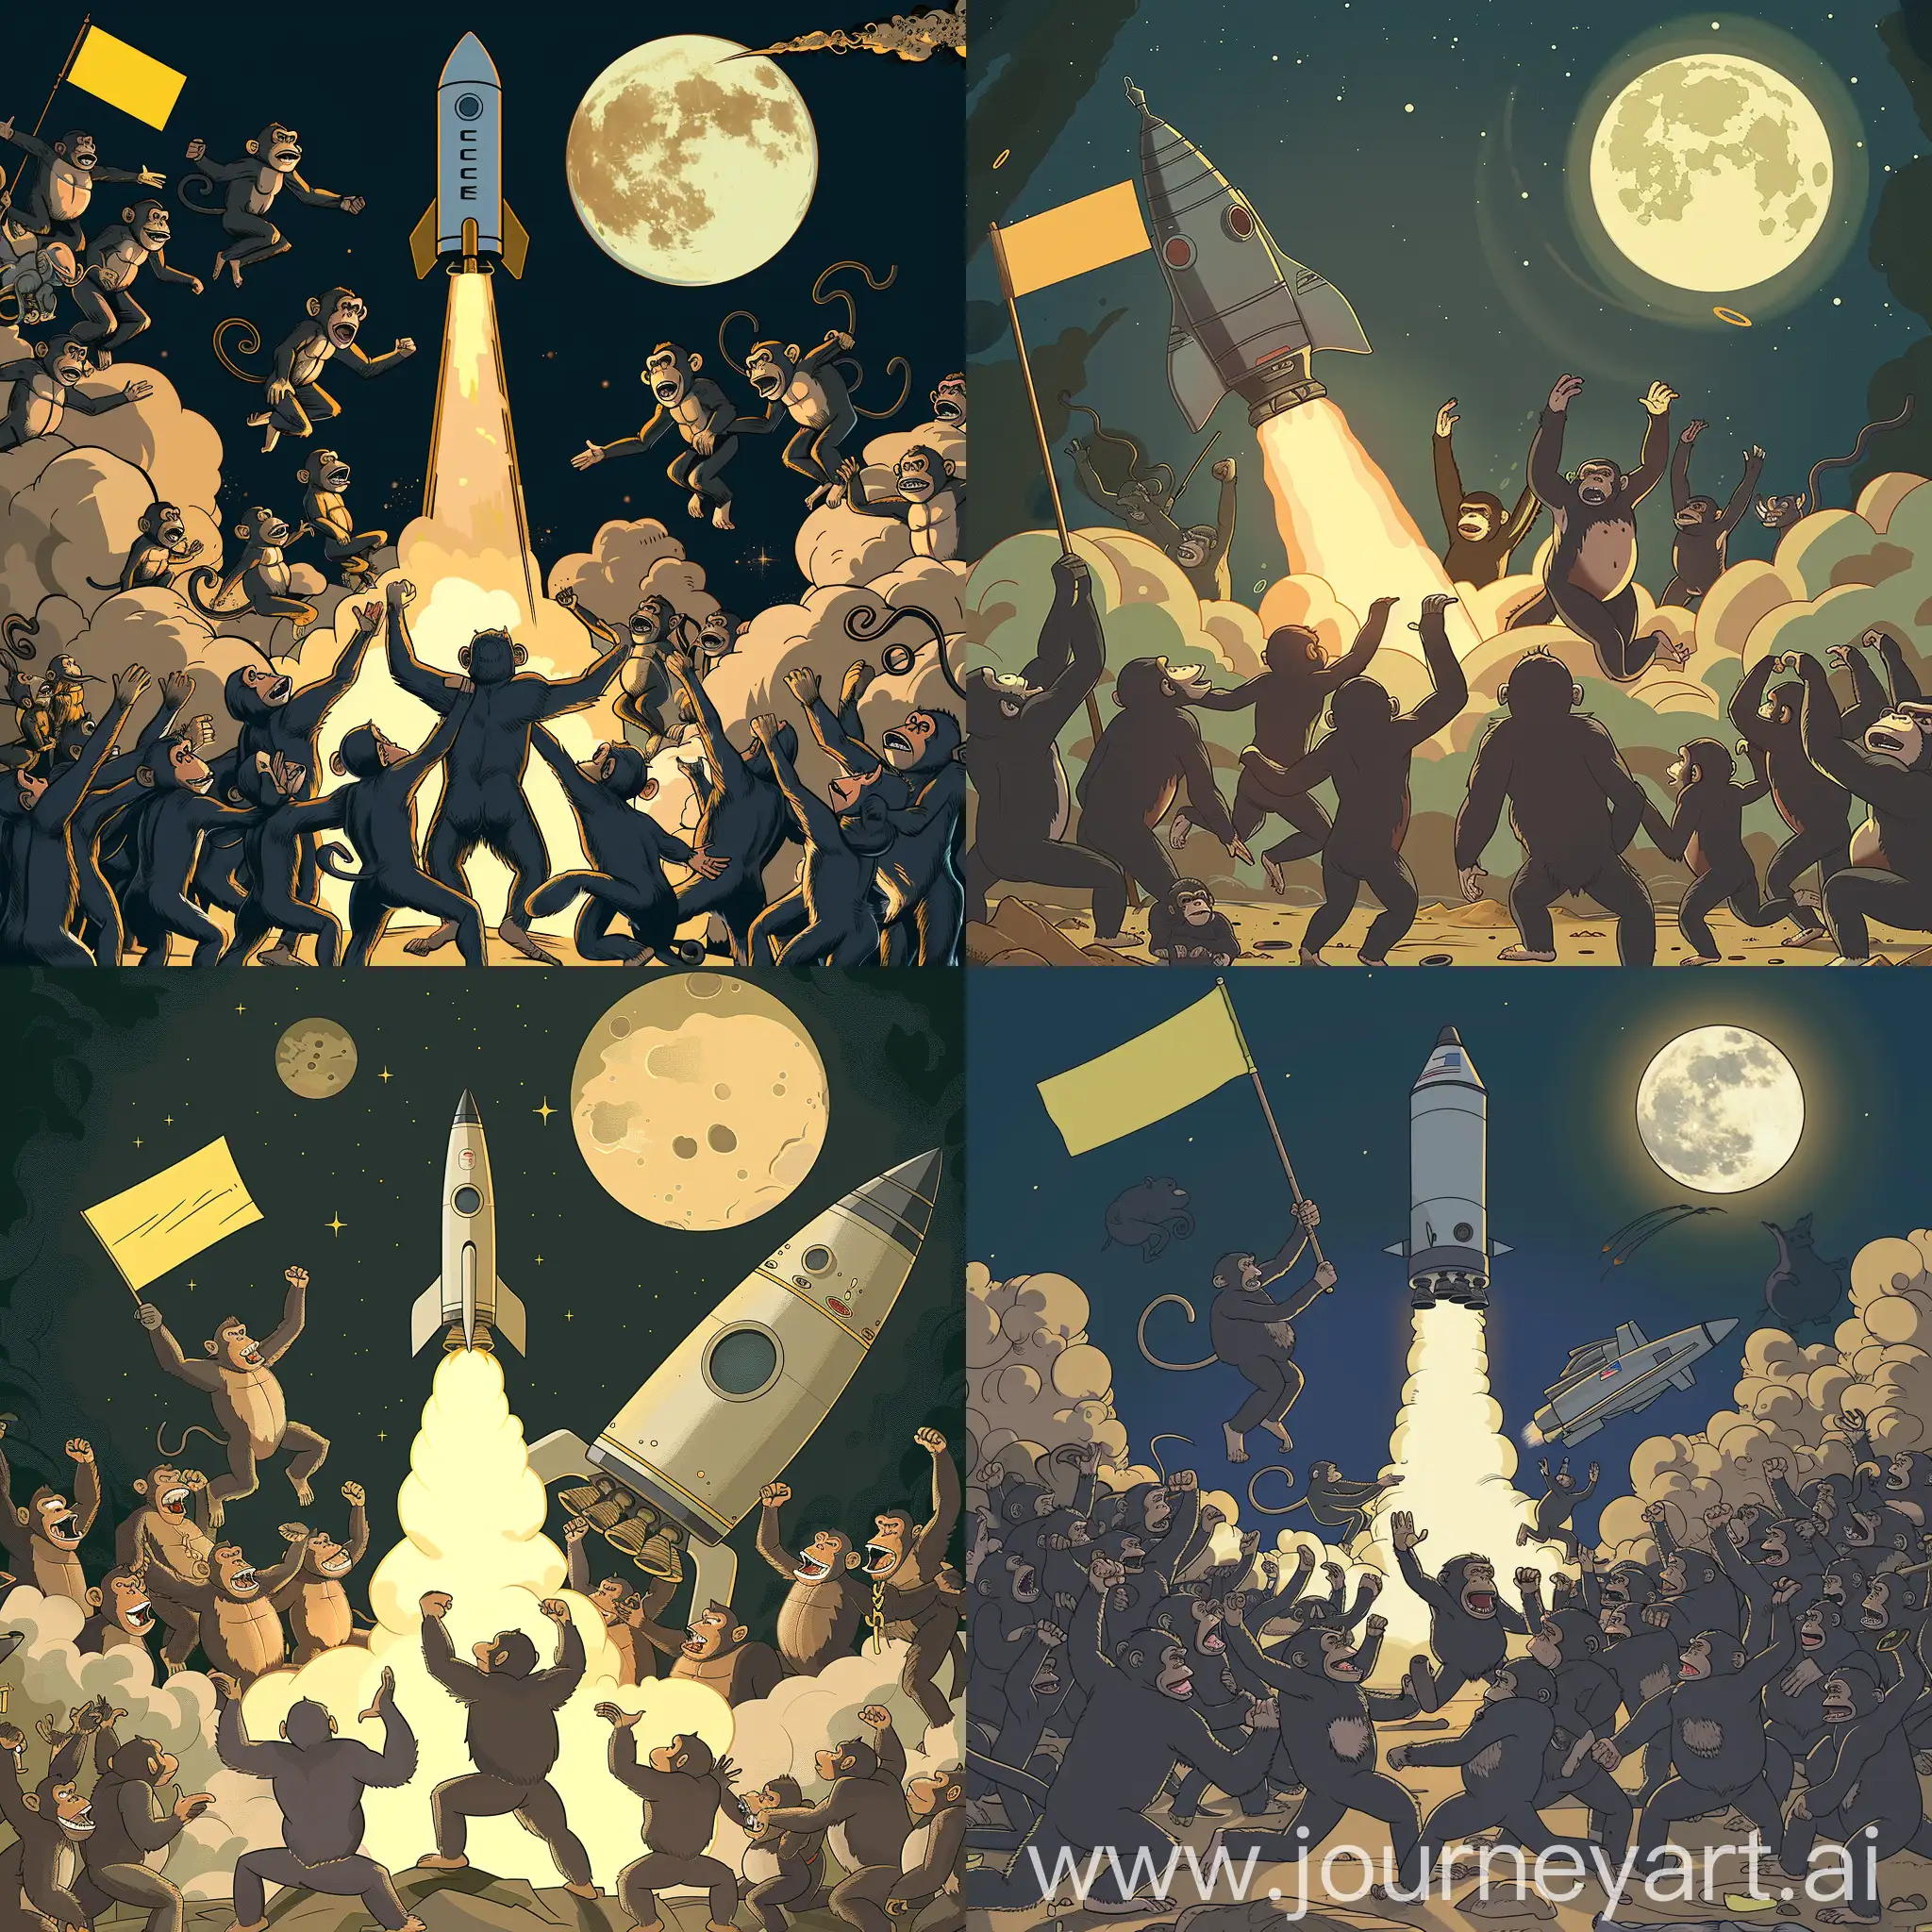 cartoon of hundreds of apes gathered around a launching spaceship, jumping around and celebrating, a couple of them are holding up a blank yellow flag, the rocket ship is in the background taking with exhaust fumes, full moon, exciting atmosphere